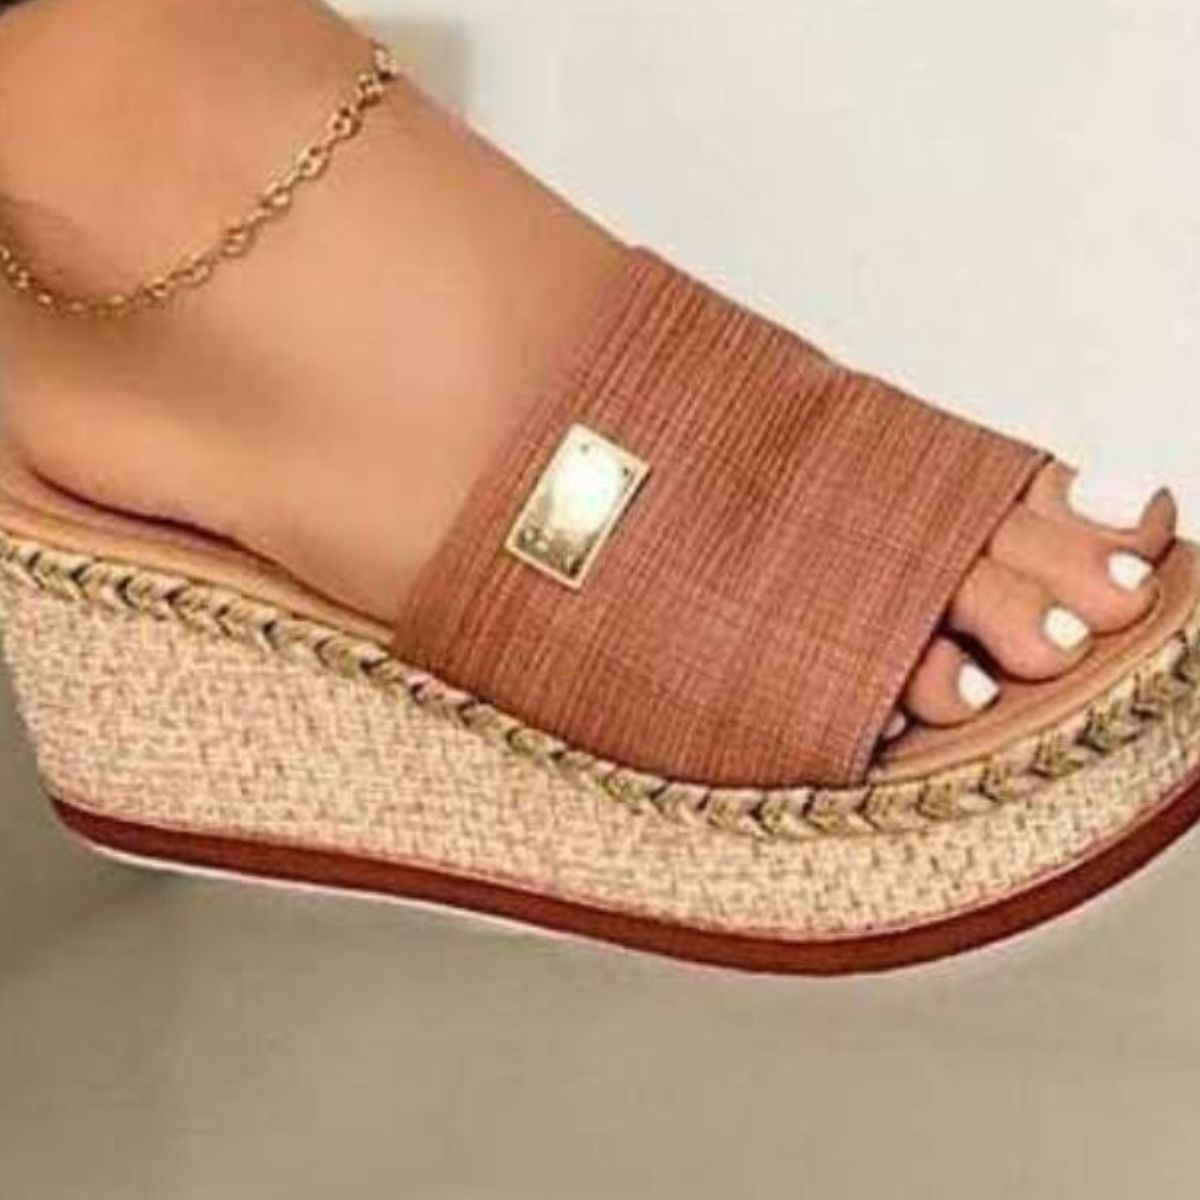 Womens Leather Open Toe Sandals